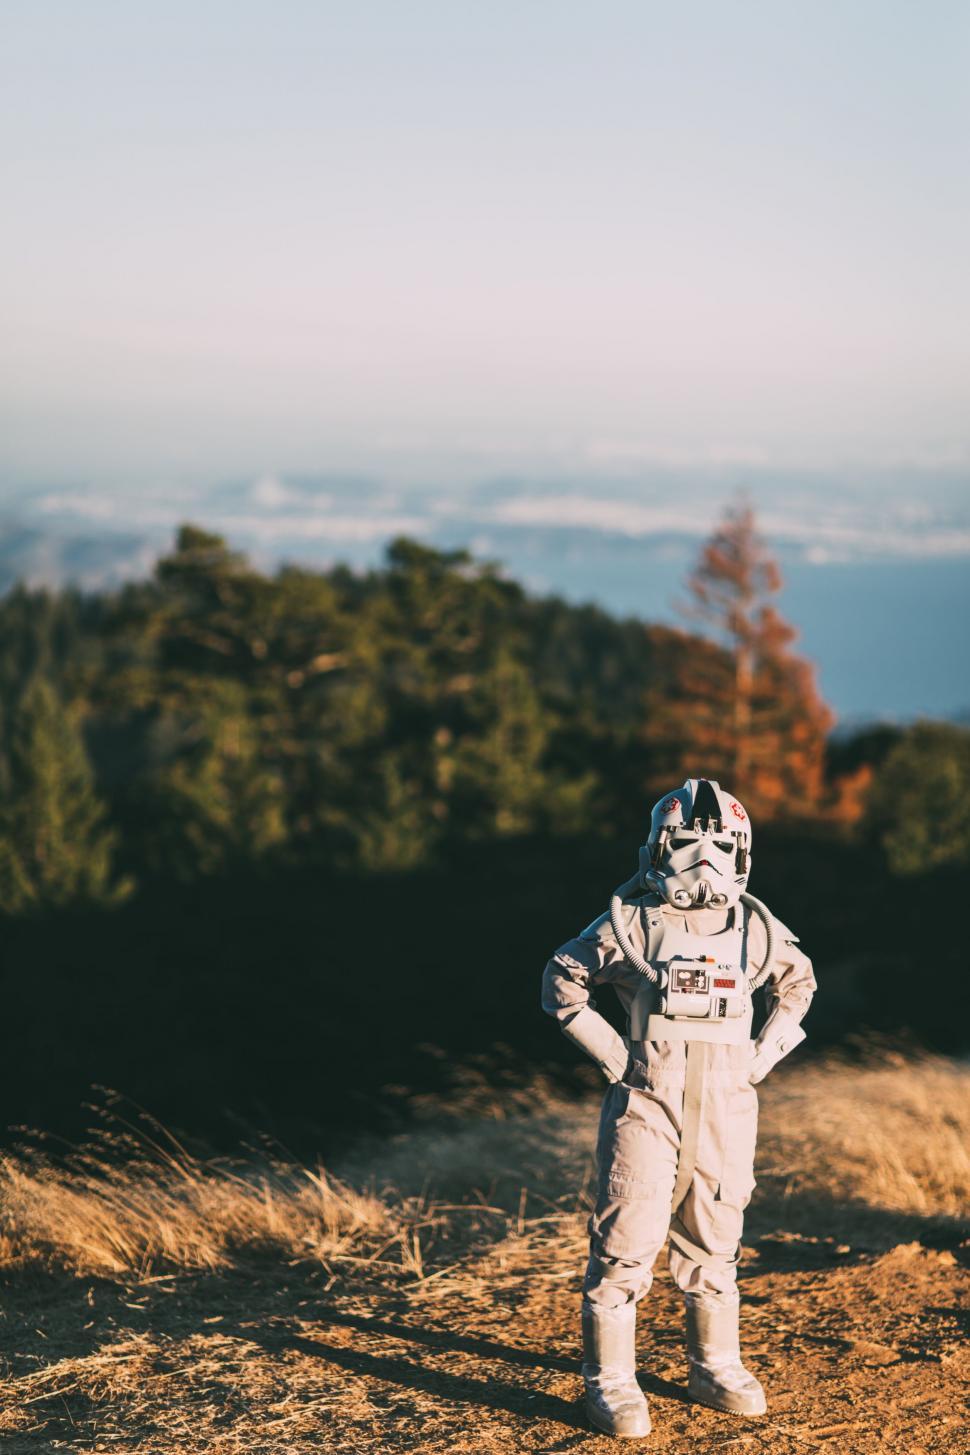 Free Image of Astronaut on Hilltop 